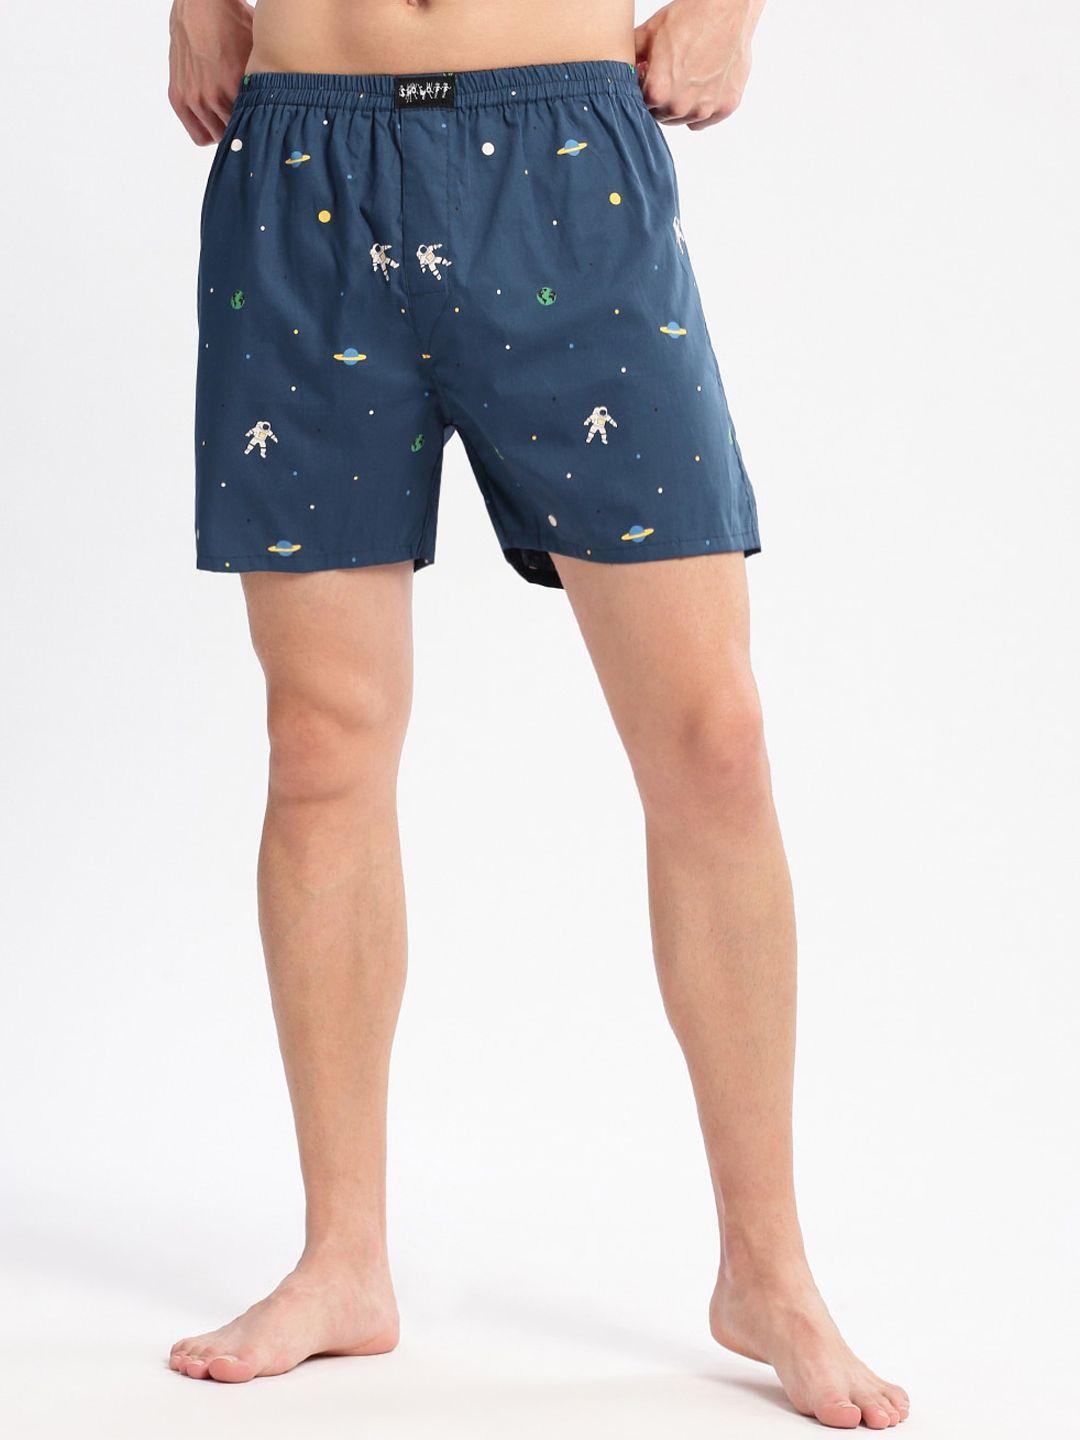 showoff-space-printed-pure-cotton-boxers-am-141-1_teal